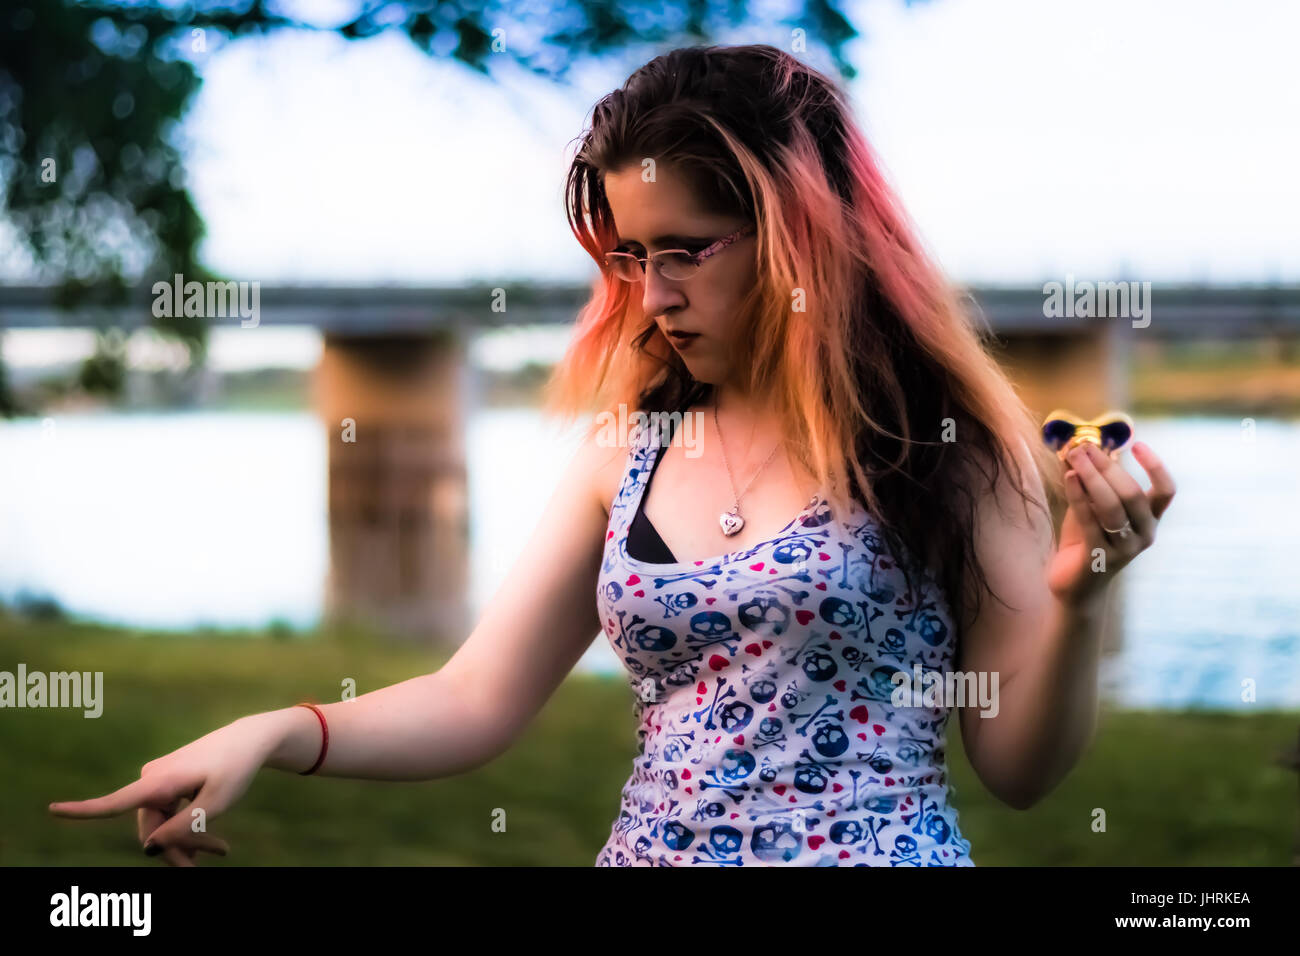 Ashley is clearly in disagreement with something, possibly an angry duck by the river. Stock Photo